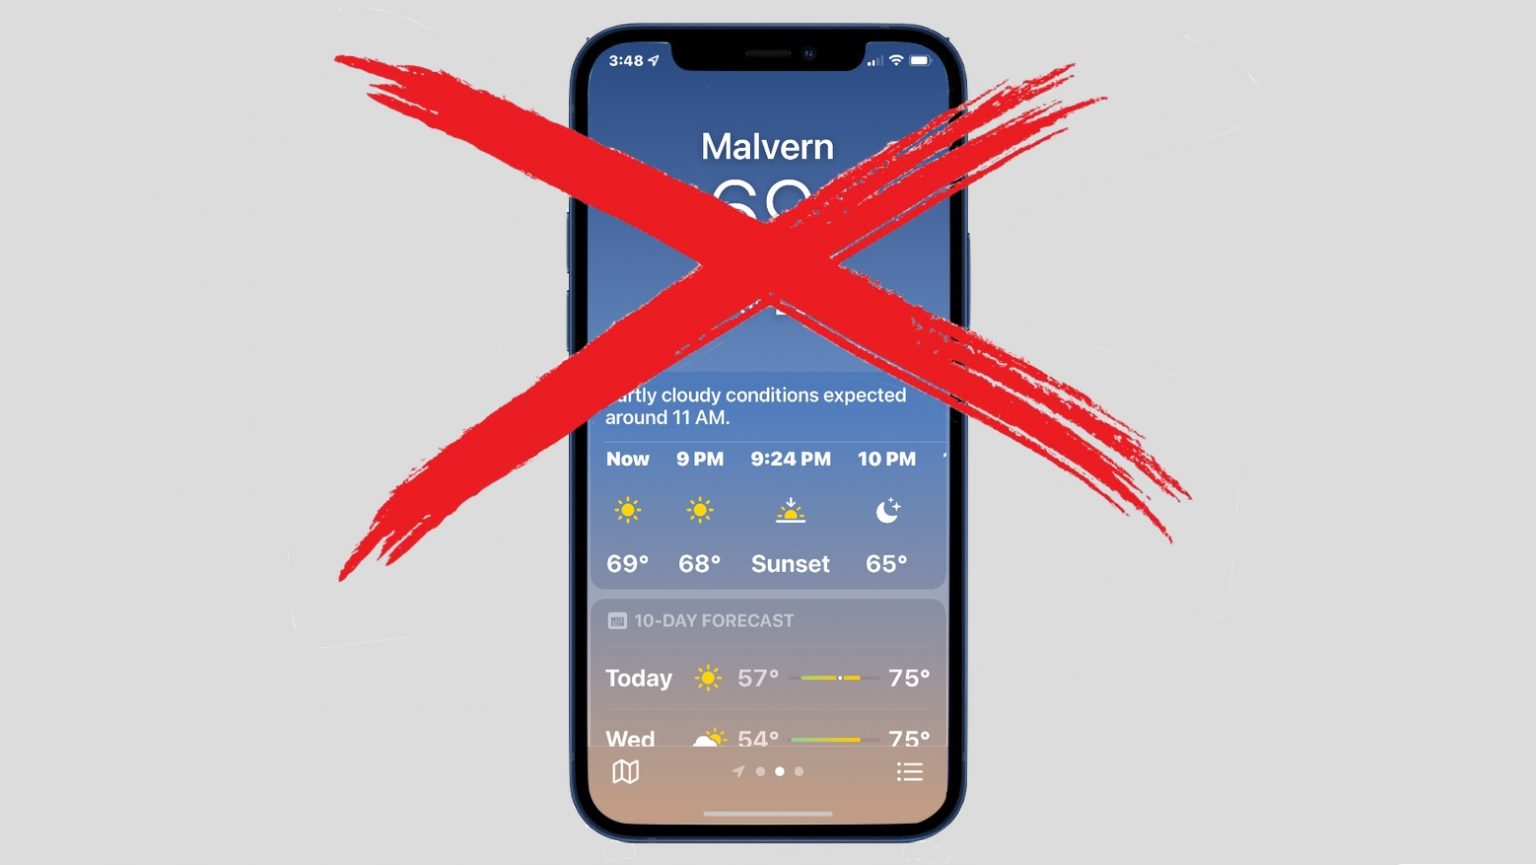 Apple’s iPhone Weather app is hilariously prudish